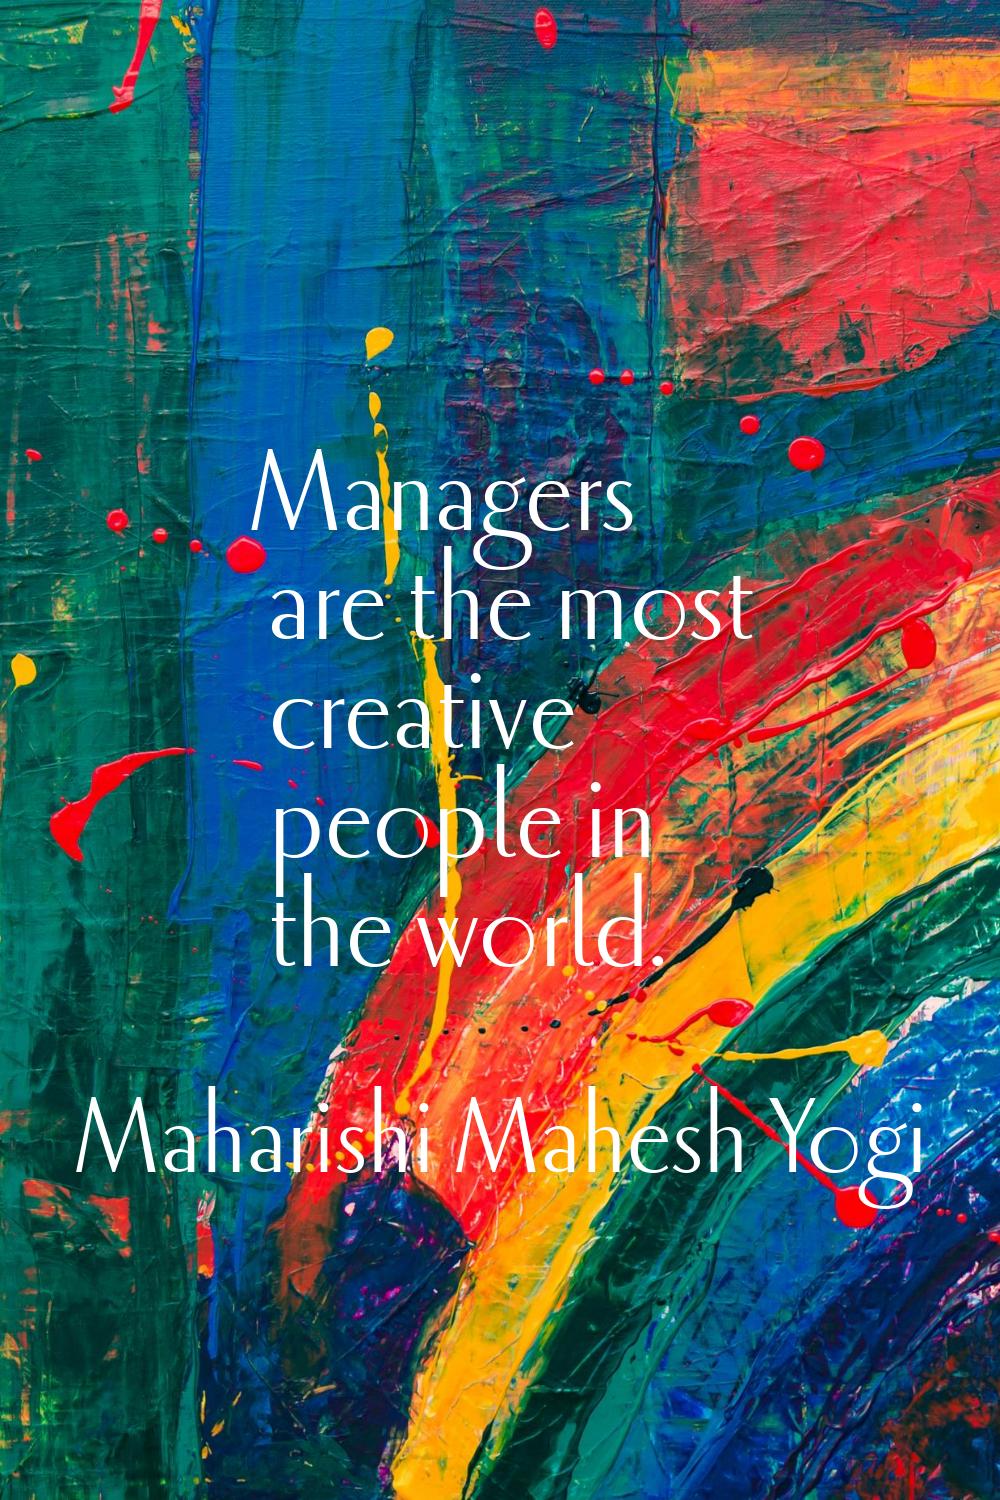 Managers are the most creative people in the world.